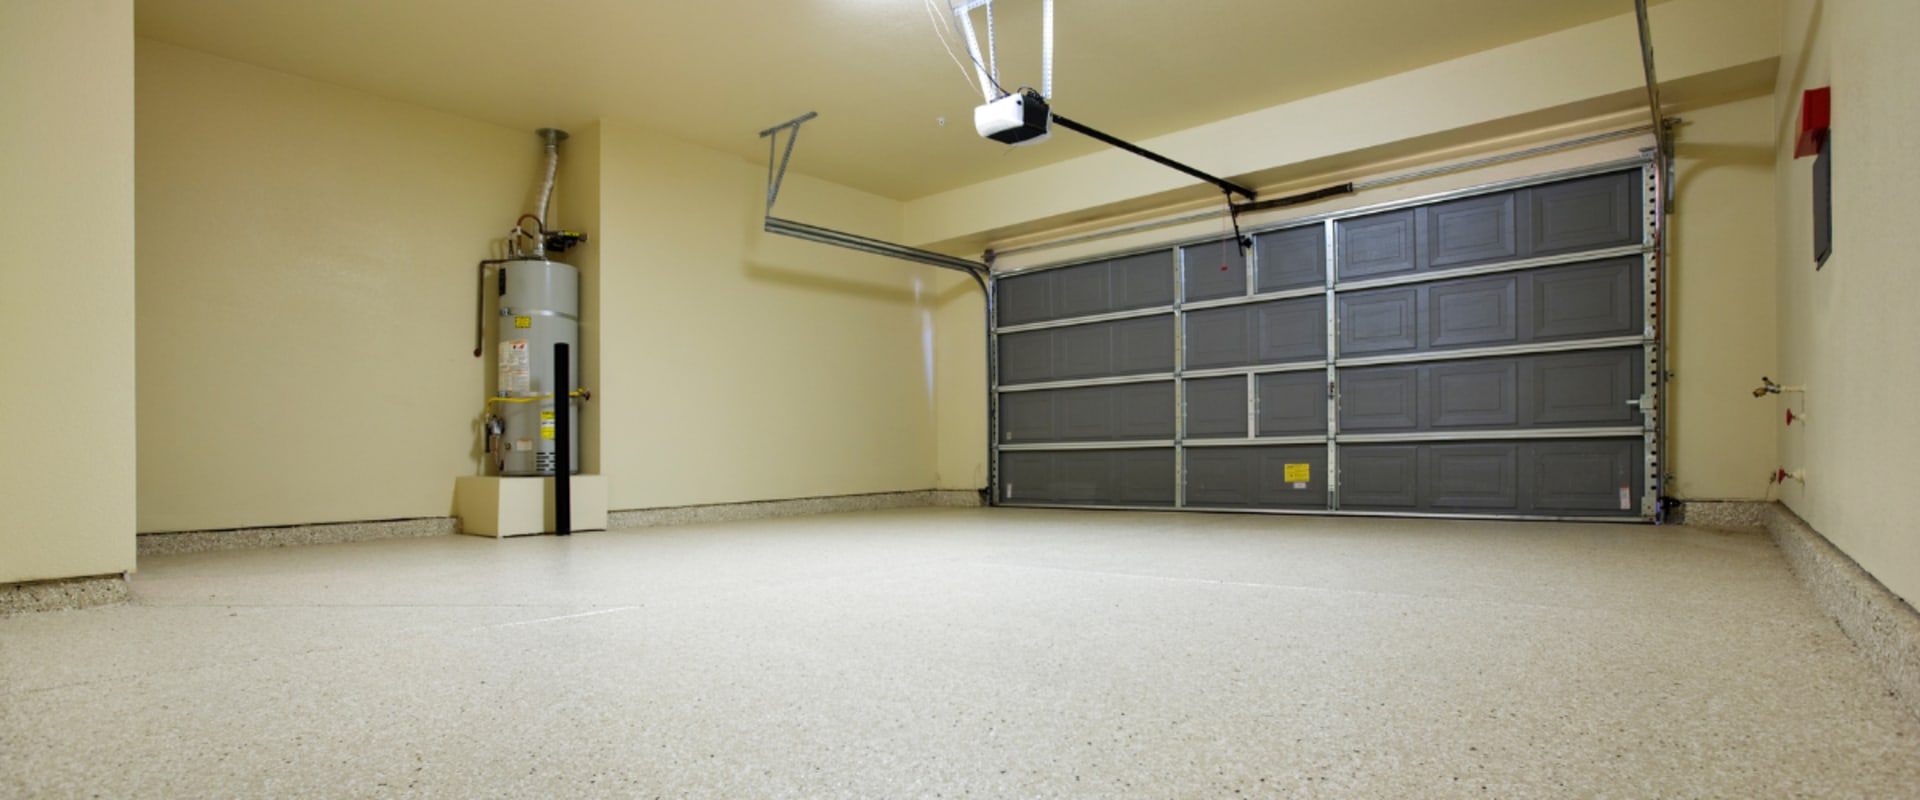 The Impact of Weather Conditions on Garage Door Performance and the Importance of Maintenance